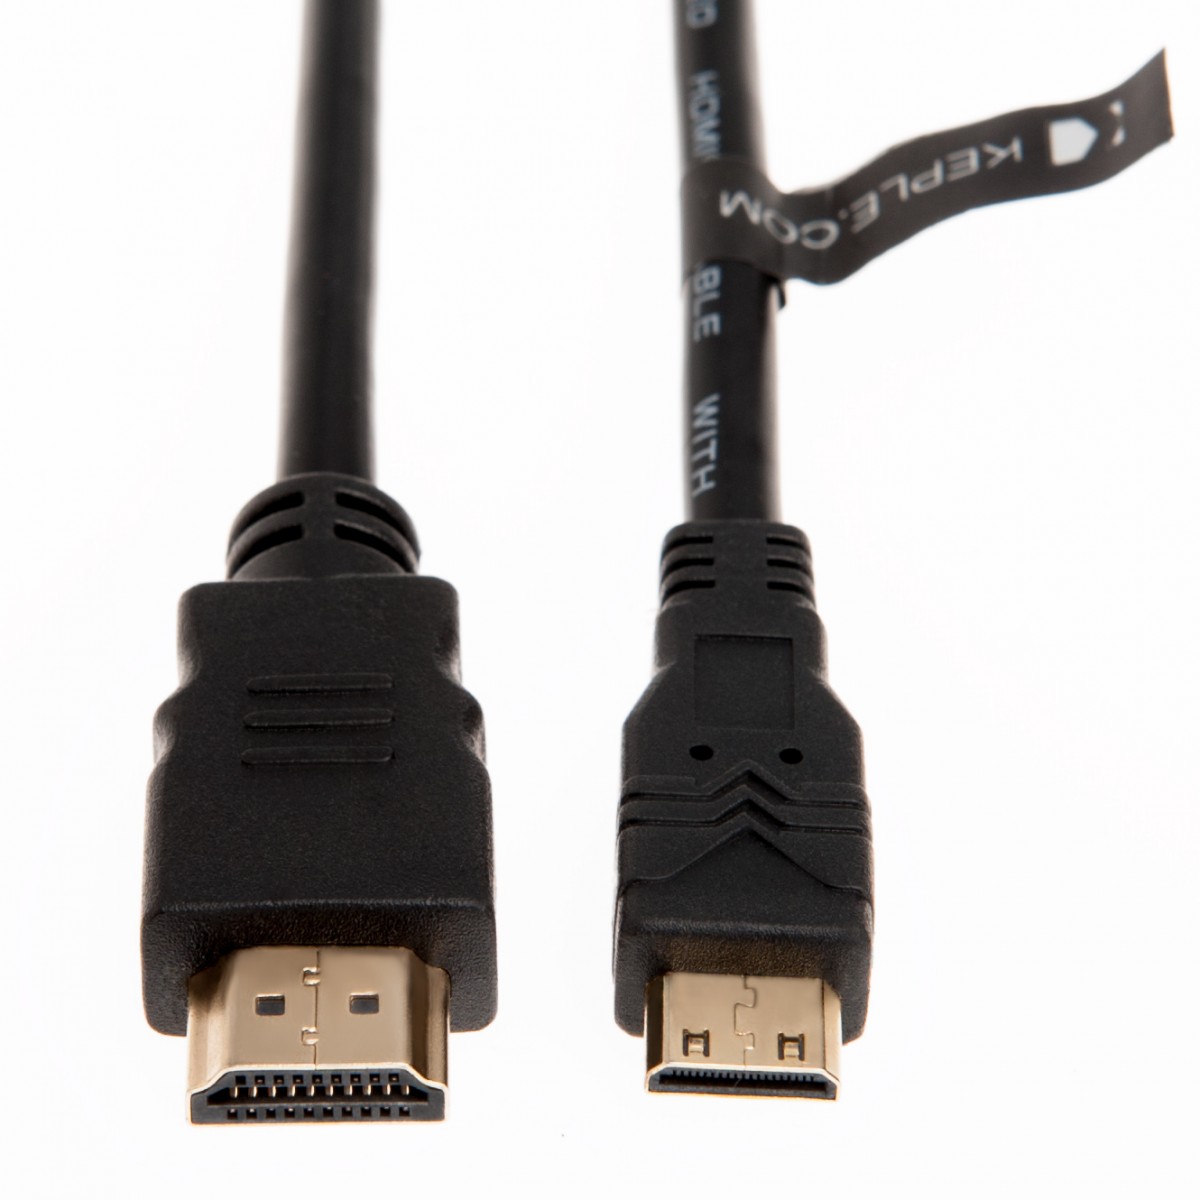 hdmi cable cable to connect apple laptop to epson projector